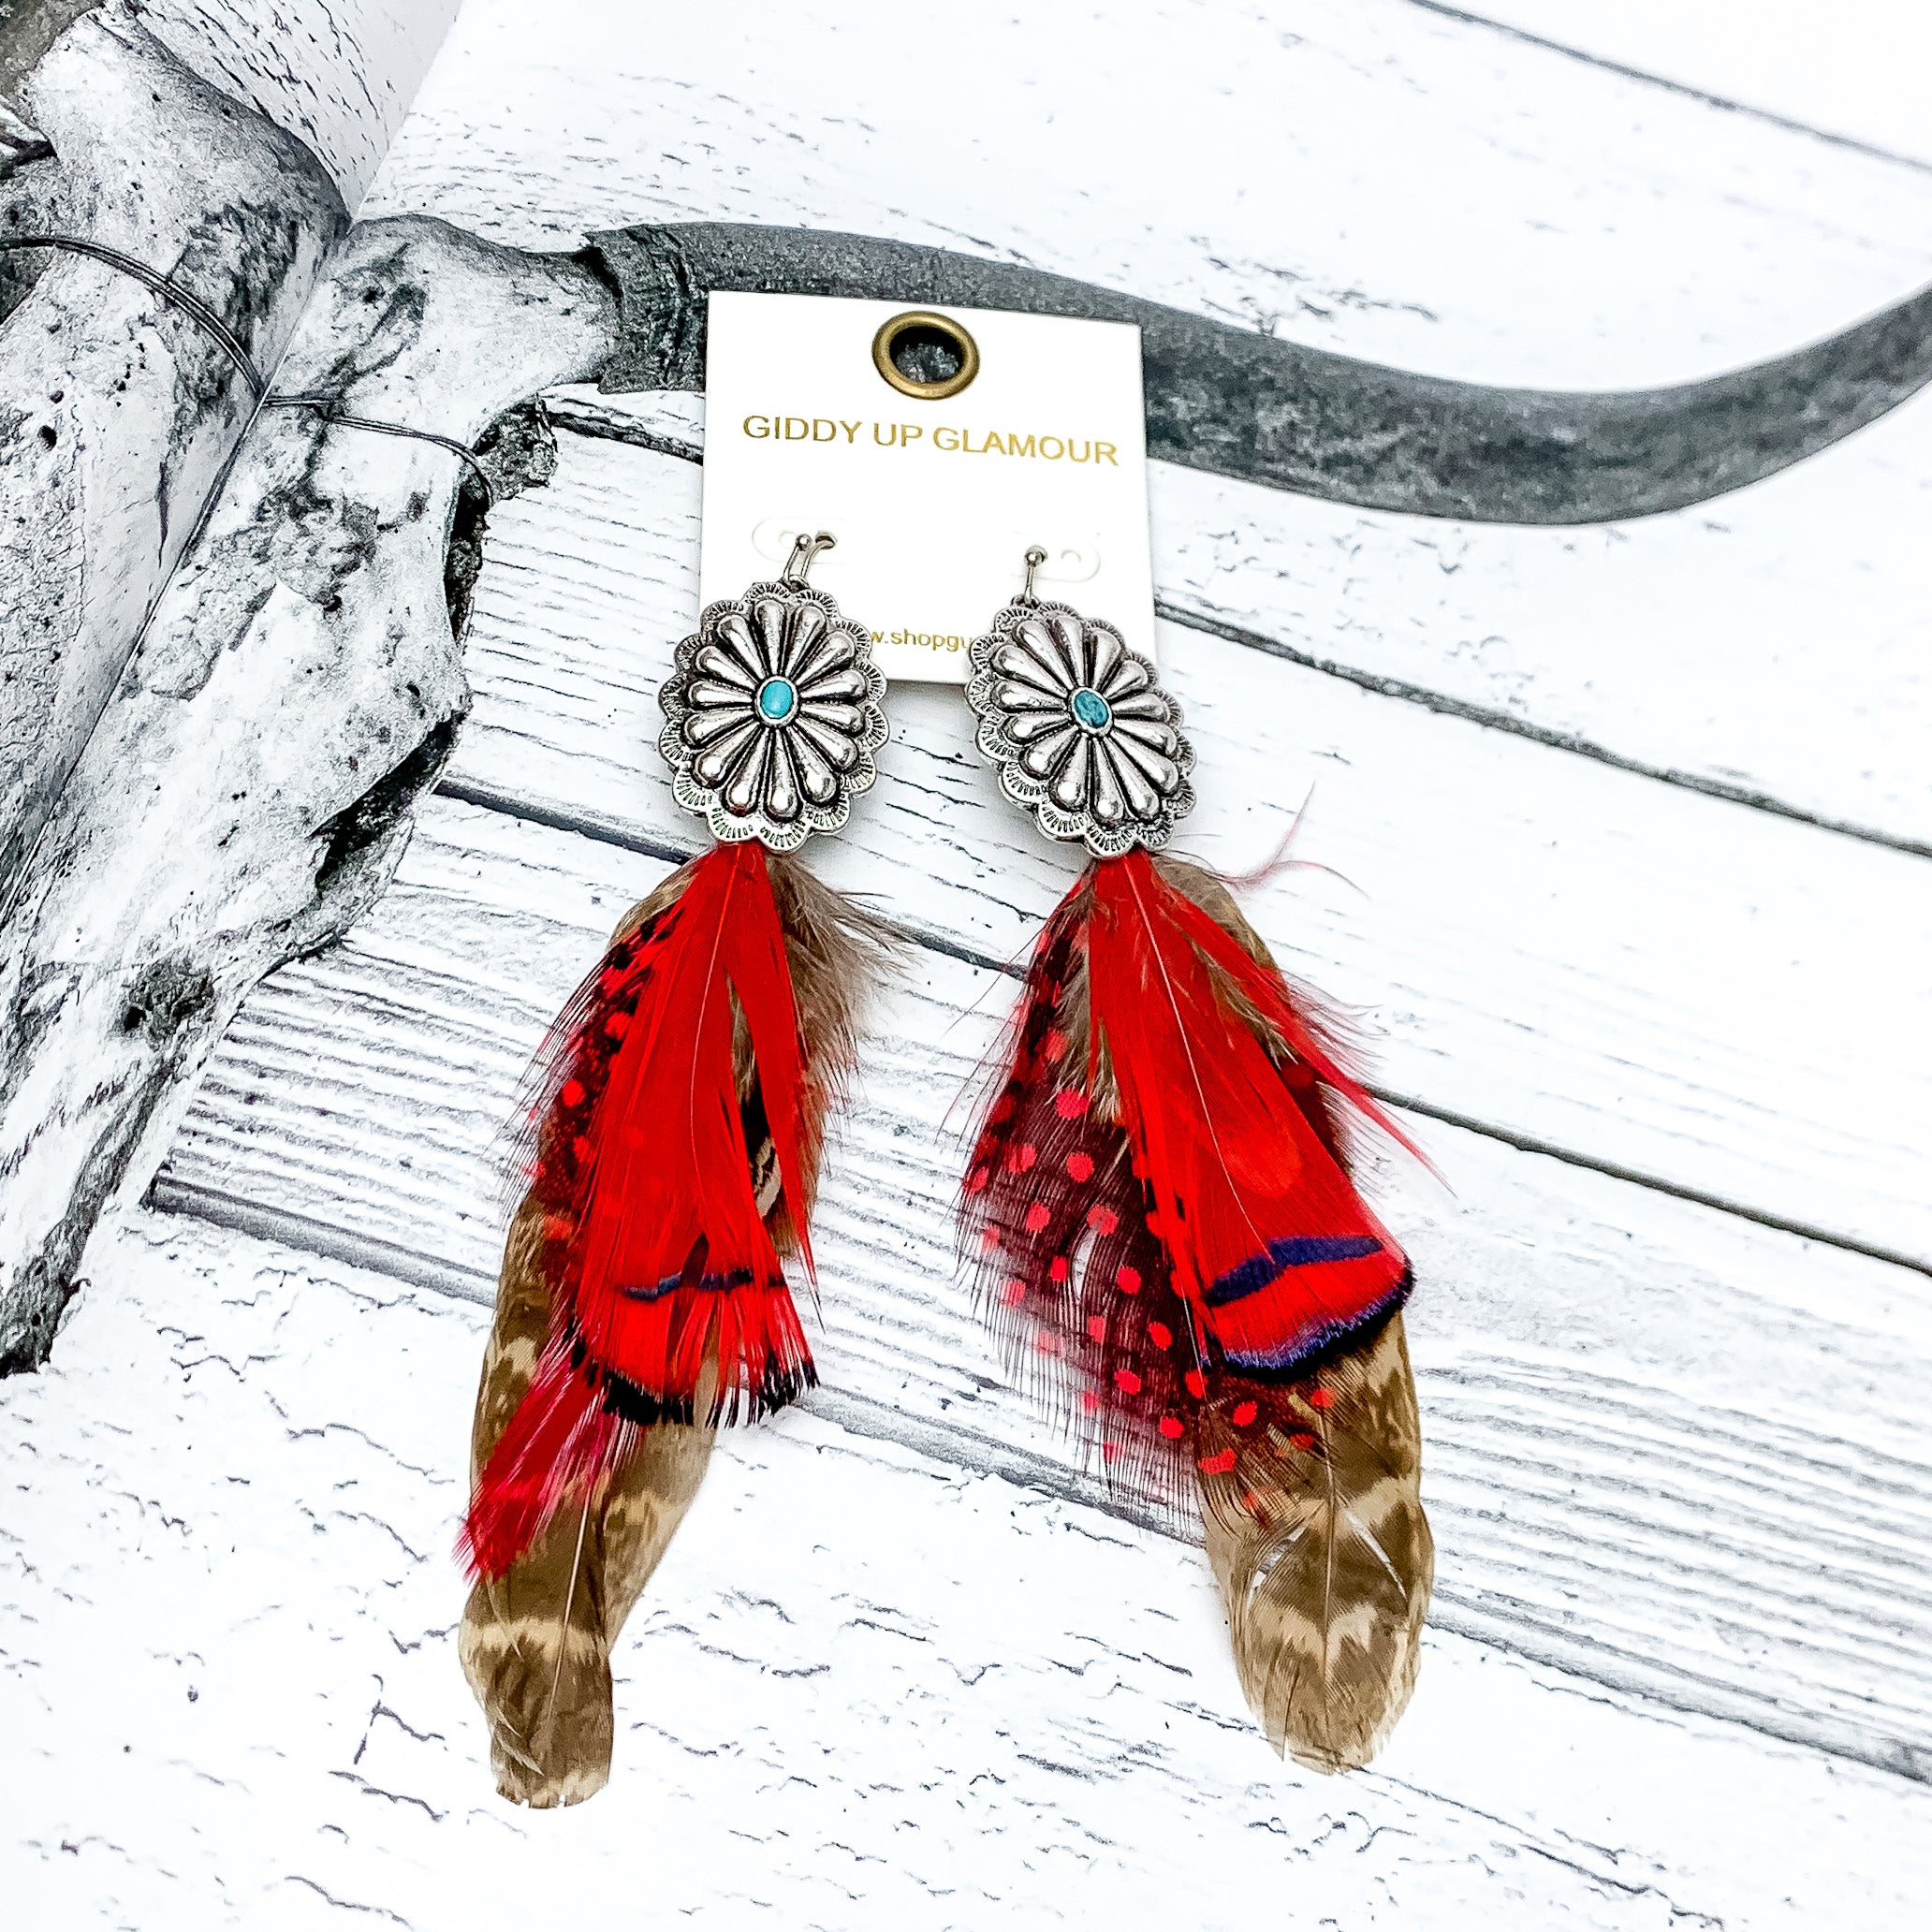 Desert Doll Silver Tone Feather Earrings in Red. Pictured on a western page with a longhorn on the page.